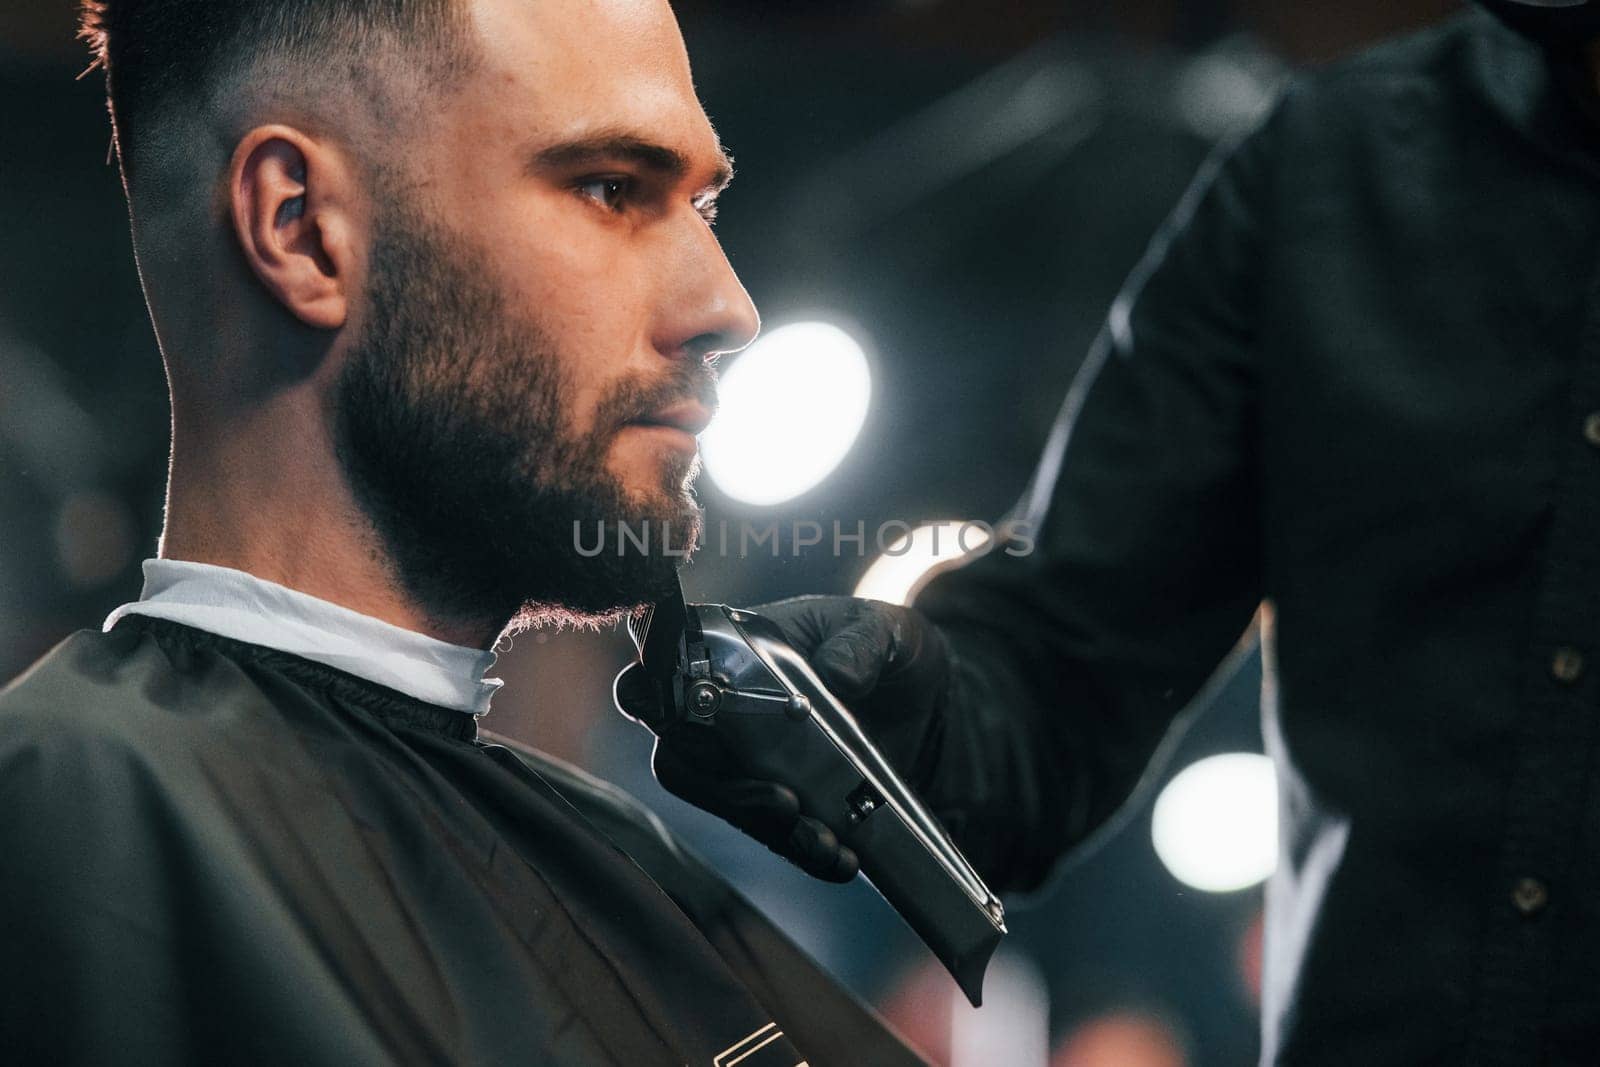 Young man with stylish hairstyle sitting and getting his beard shaved in barber shop.